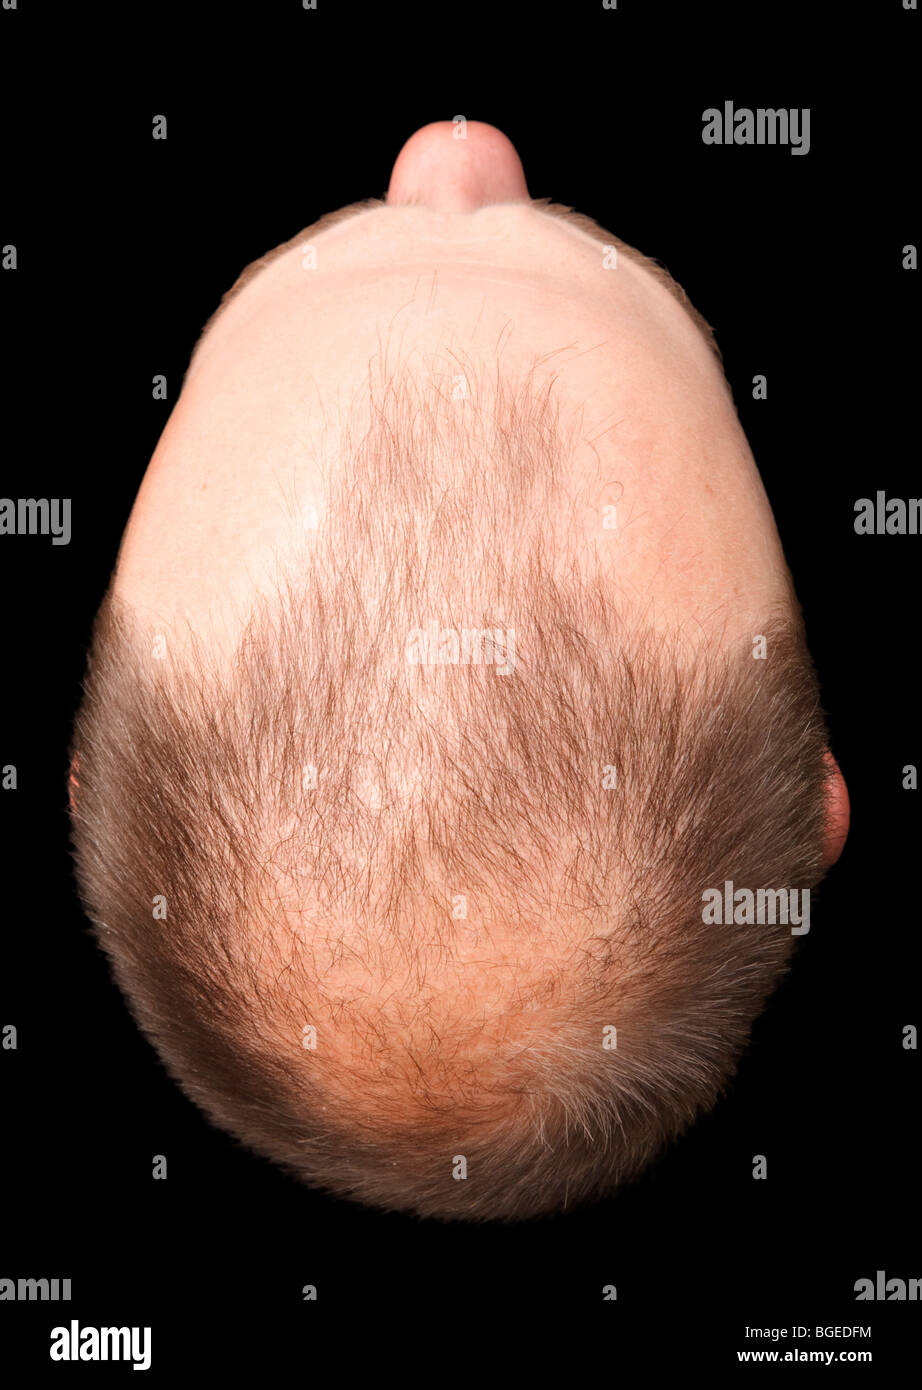 A balding head viewed from above, isolated against a black background Stock Photo